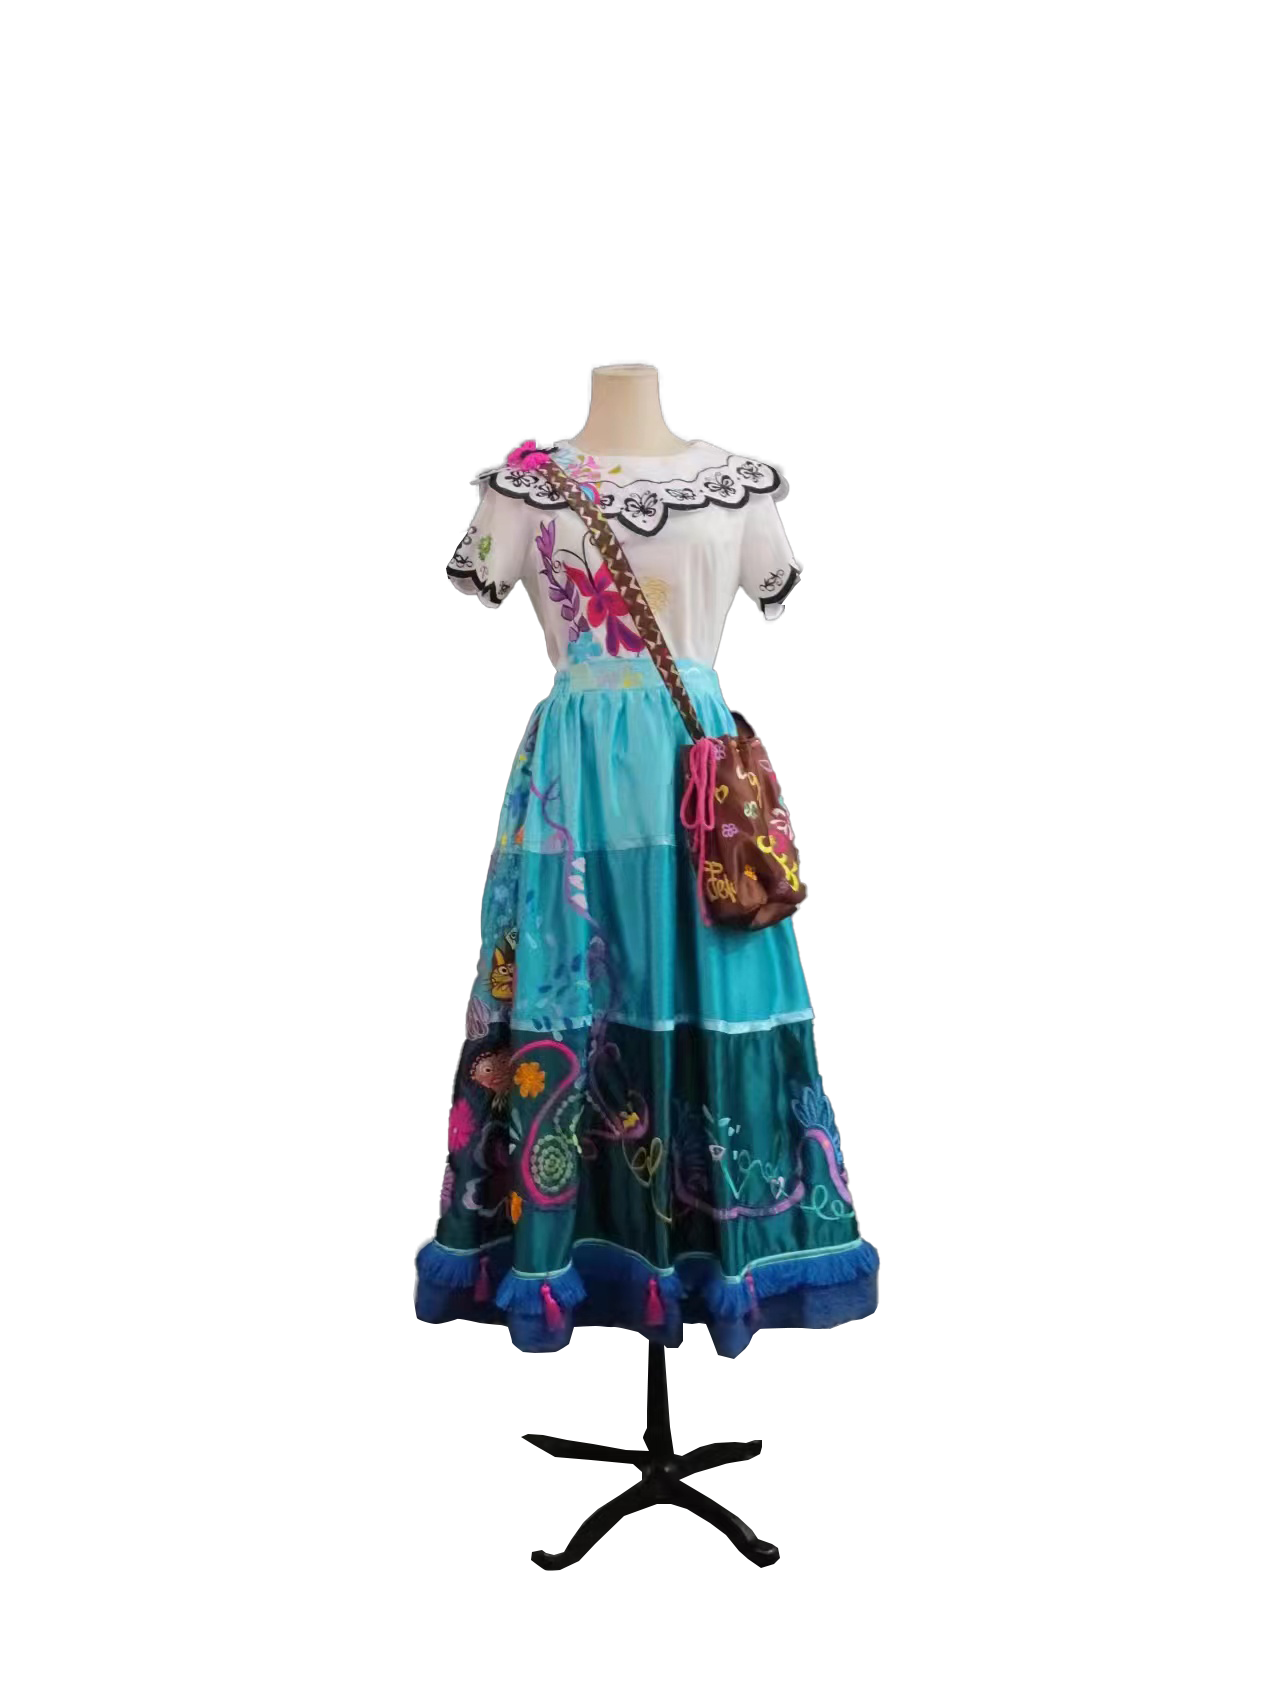 Encanto Mirabel Dolores Embroidery Dress Cosplay Costumes